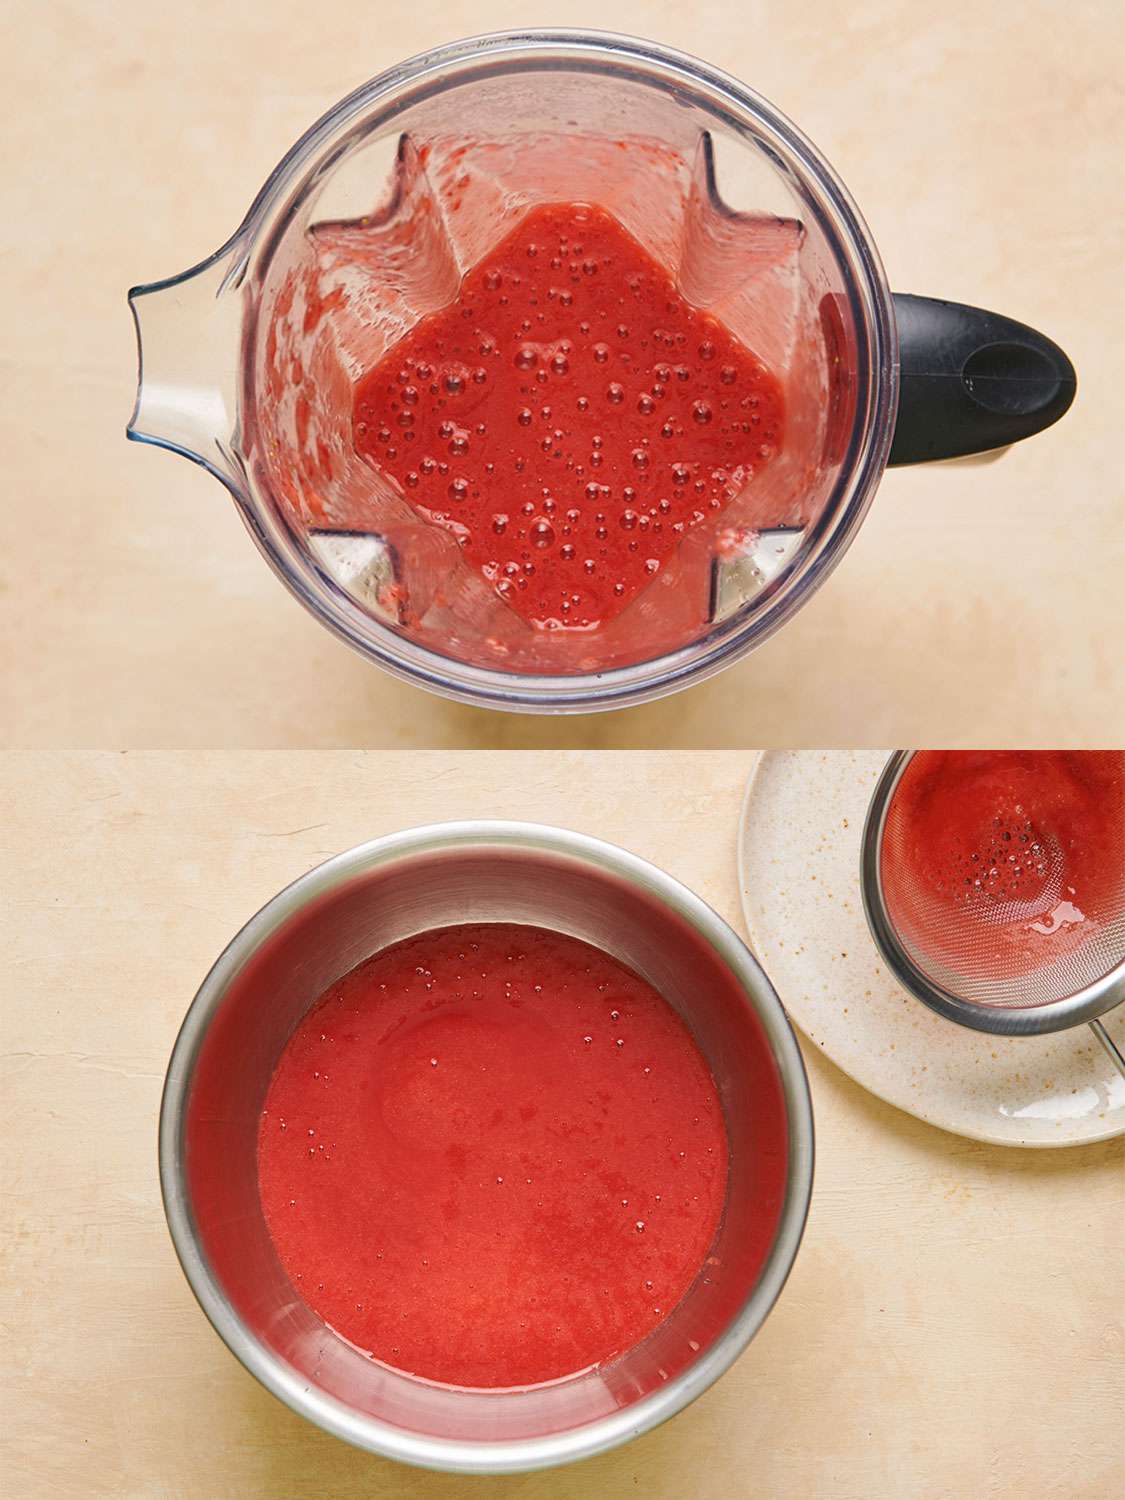 A two-image collage. The top image shows a blender containing the fully pureed strawberries. The bottom image shows a bowl containing the fully strained blended strawberries.